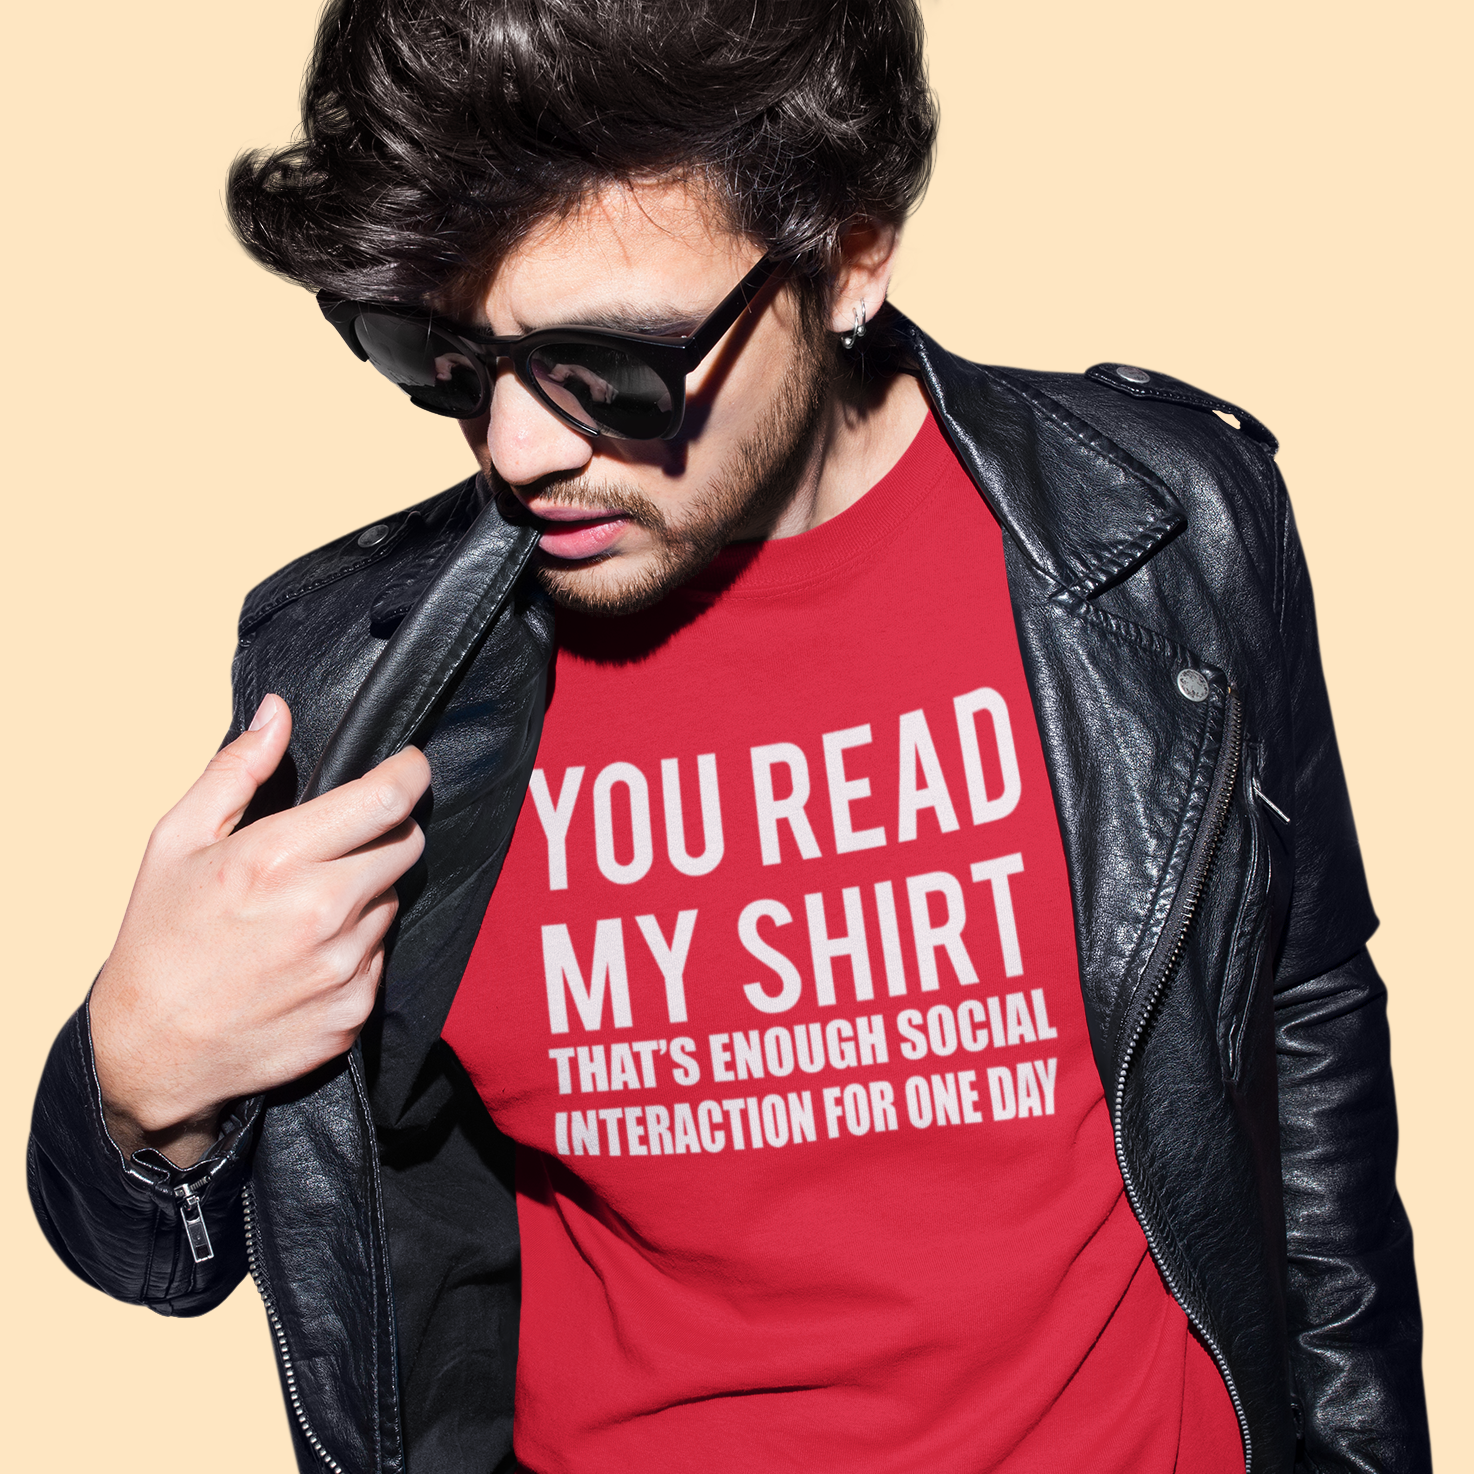 7 Inspirational T-Shirts You Should Own: Why These Are A Great Addition to Your Wardrobe